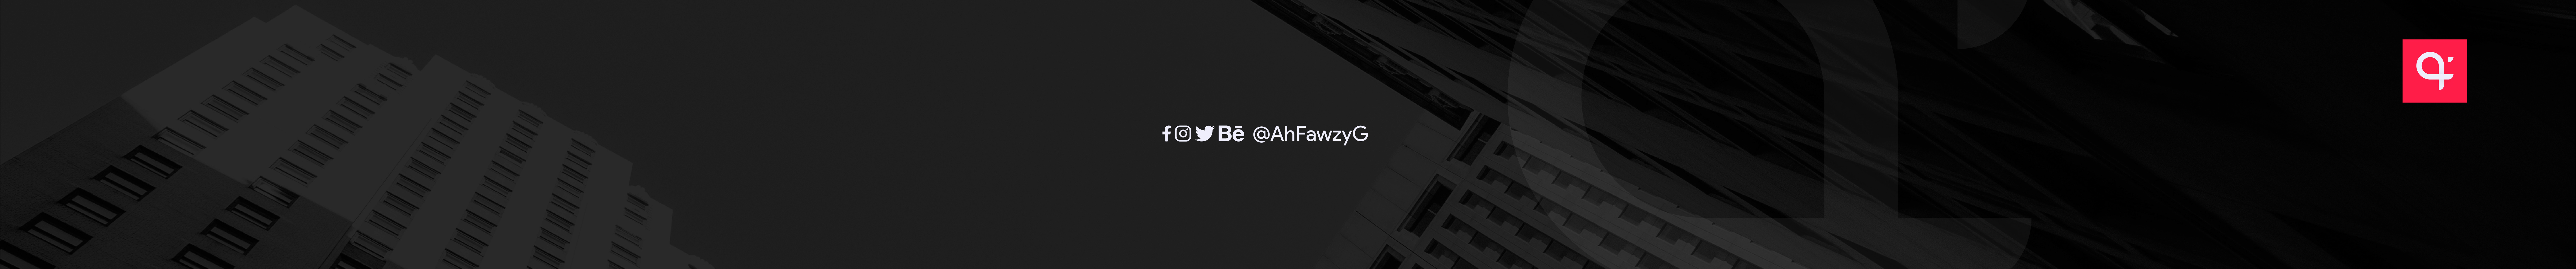 Ahmed Fawzy's profile banner